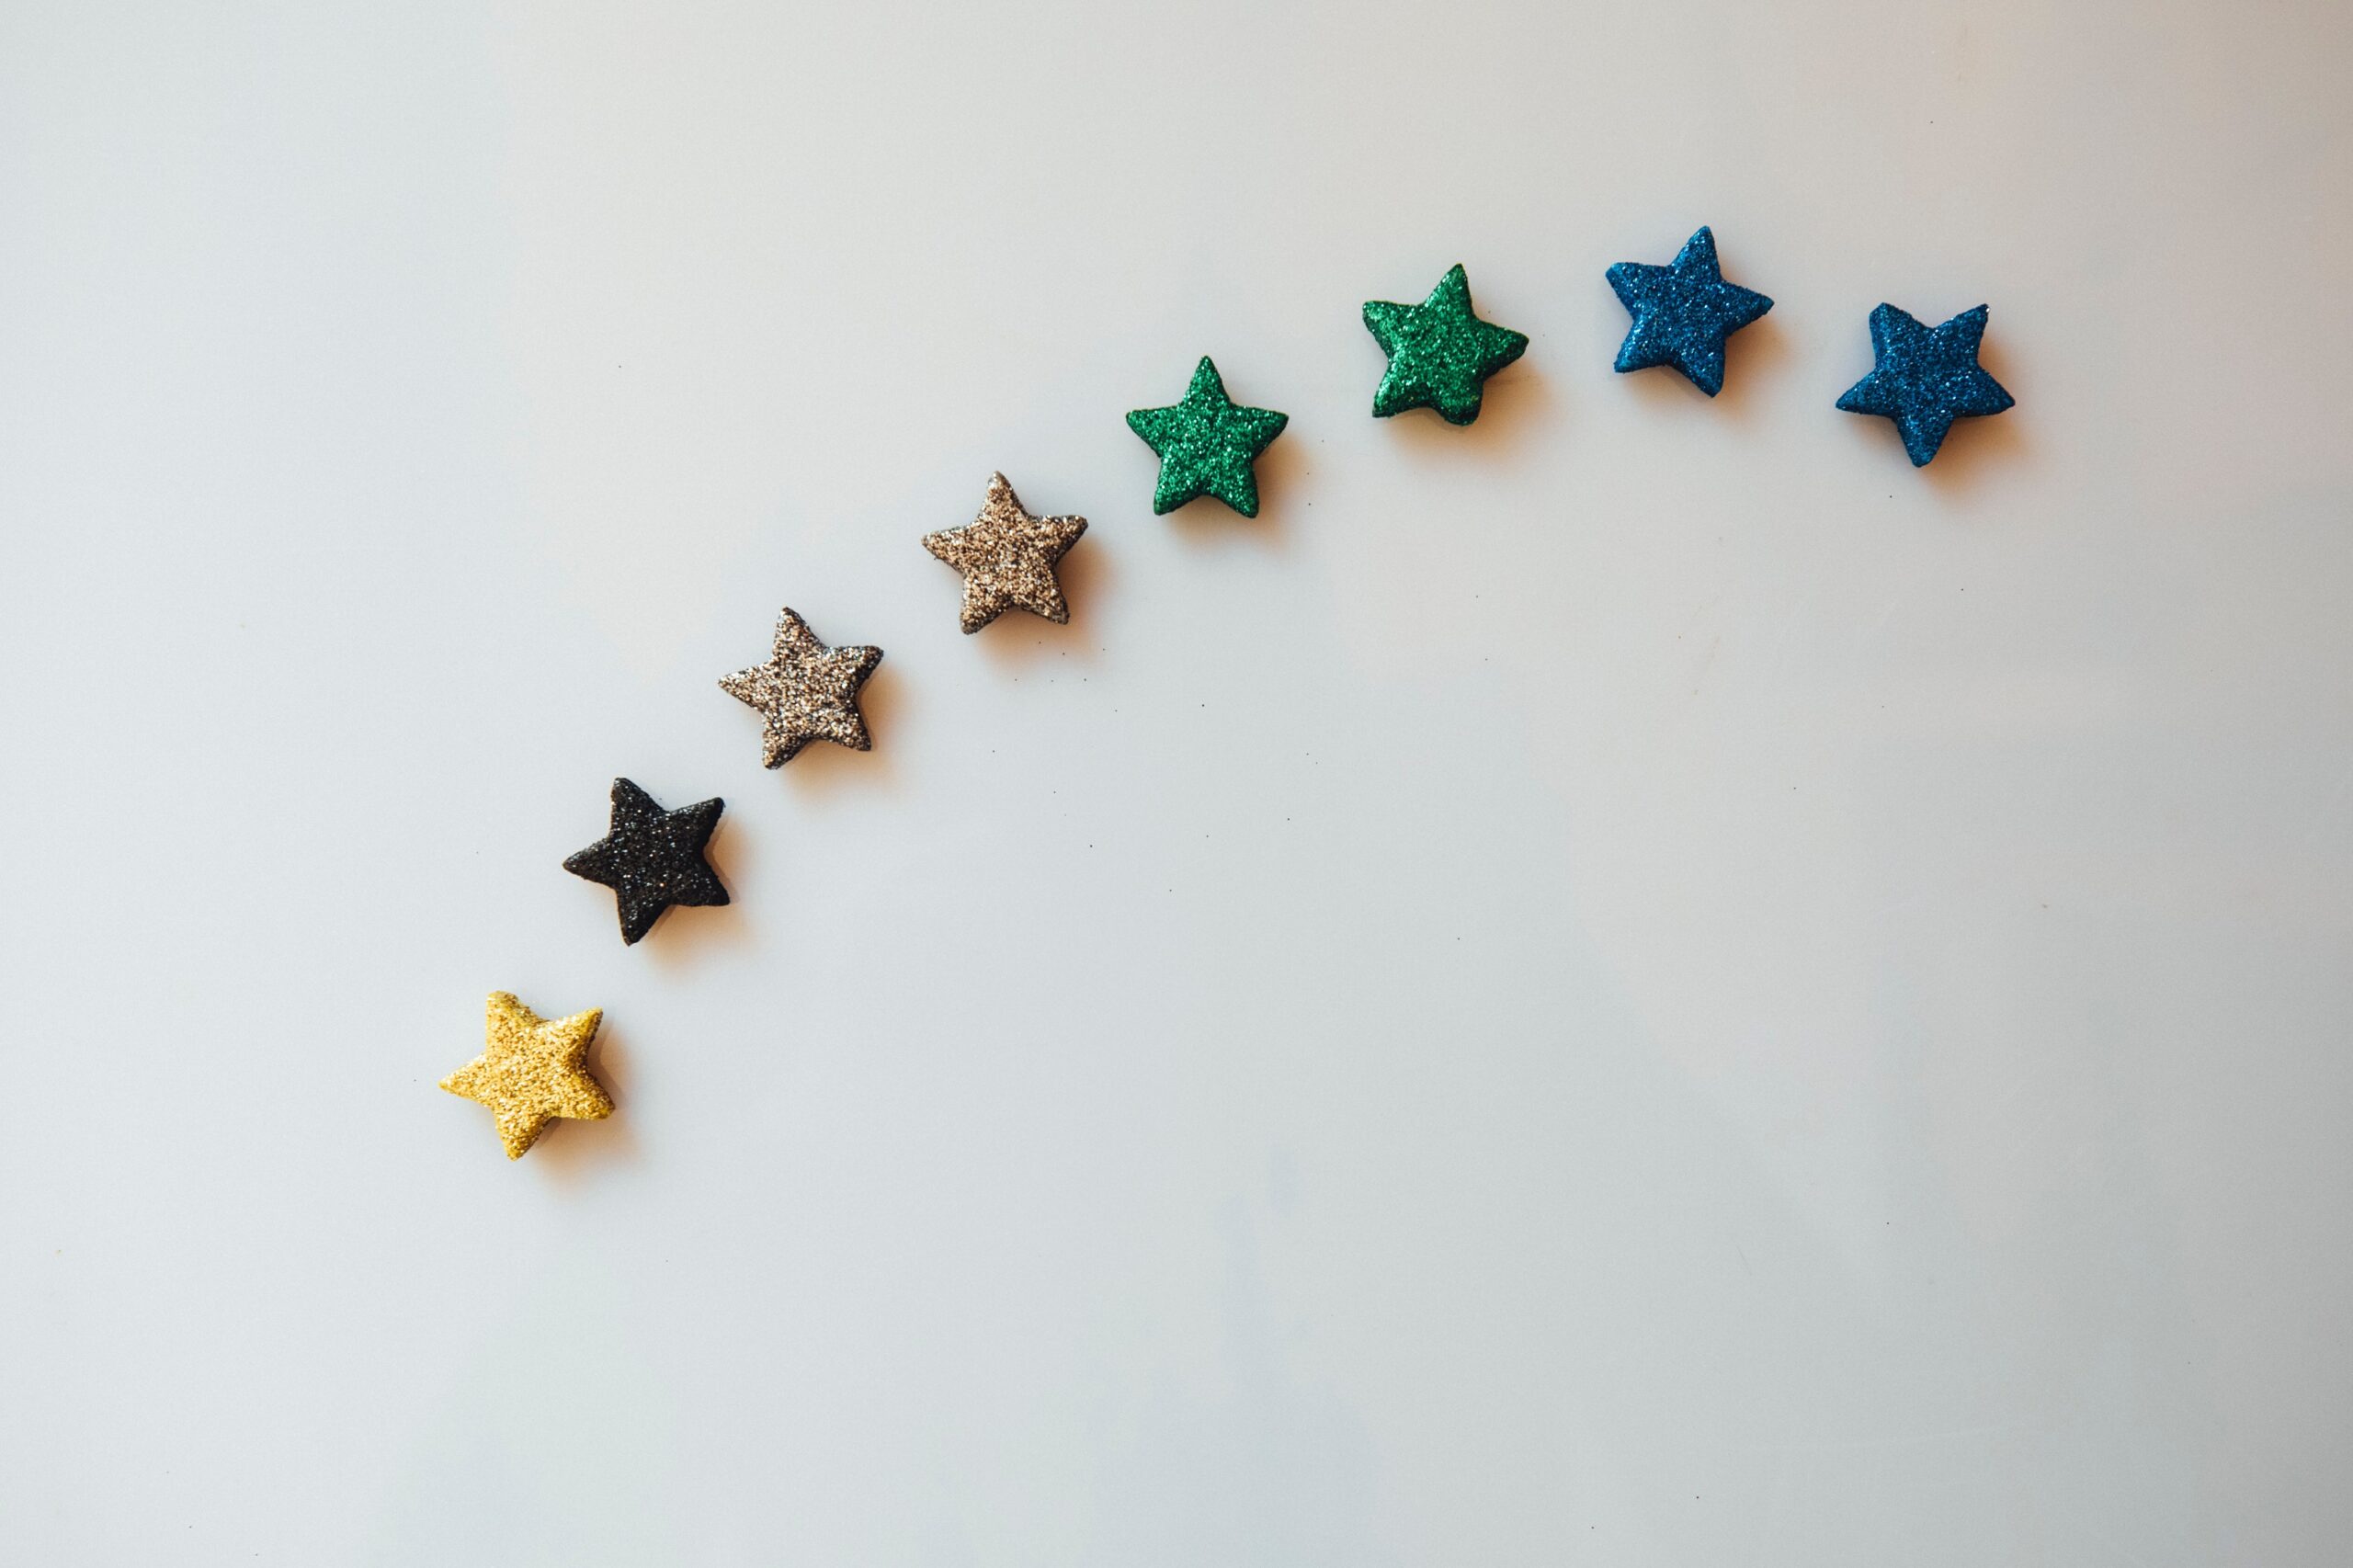 dyi star crafts ideas for kids